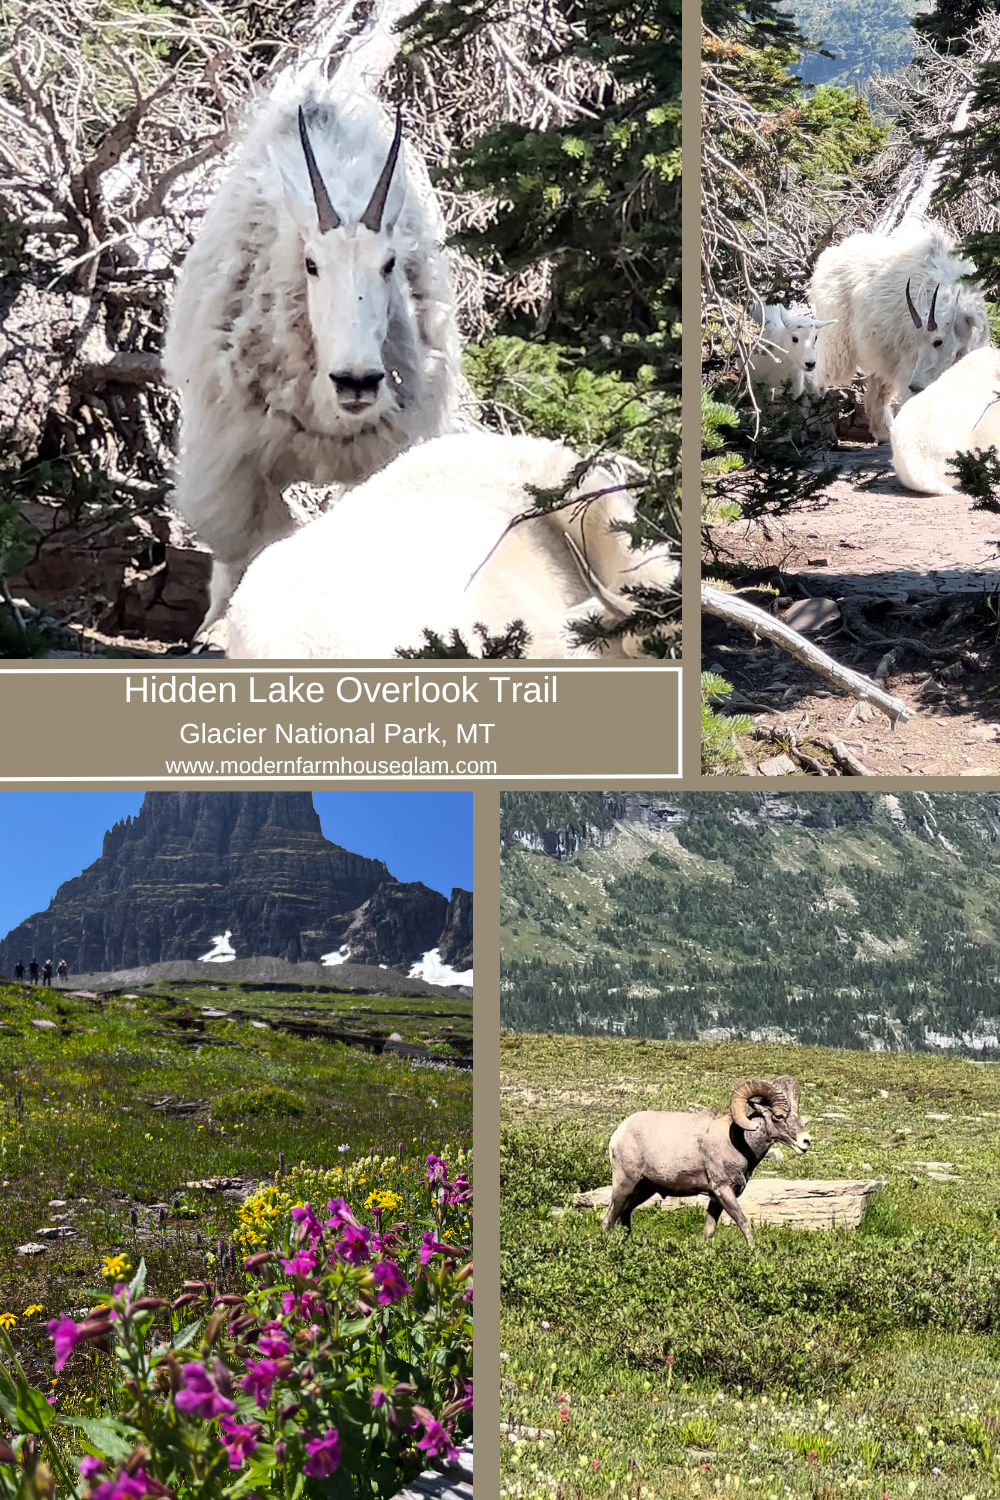 We saw mountain goats and big horned sheep on the gorgeous Hidden Lake Overlook Trail, Glacier National Park